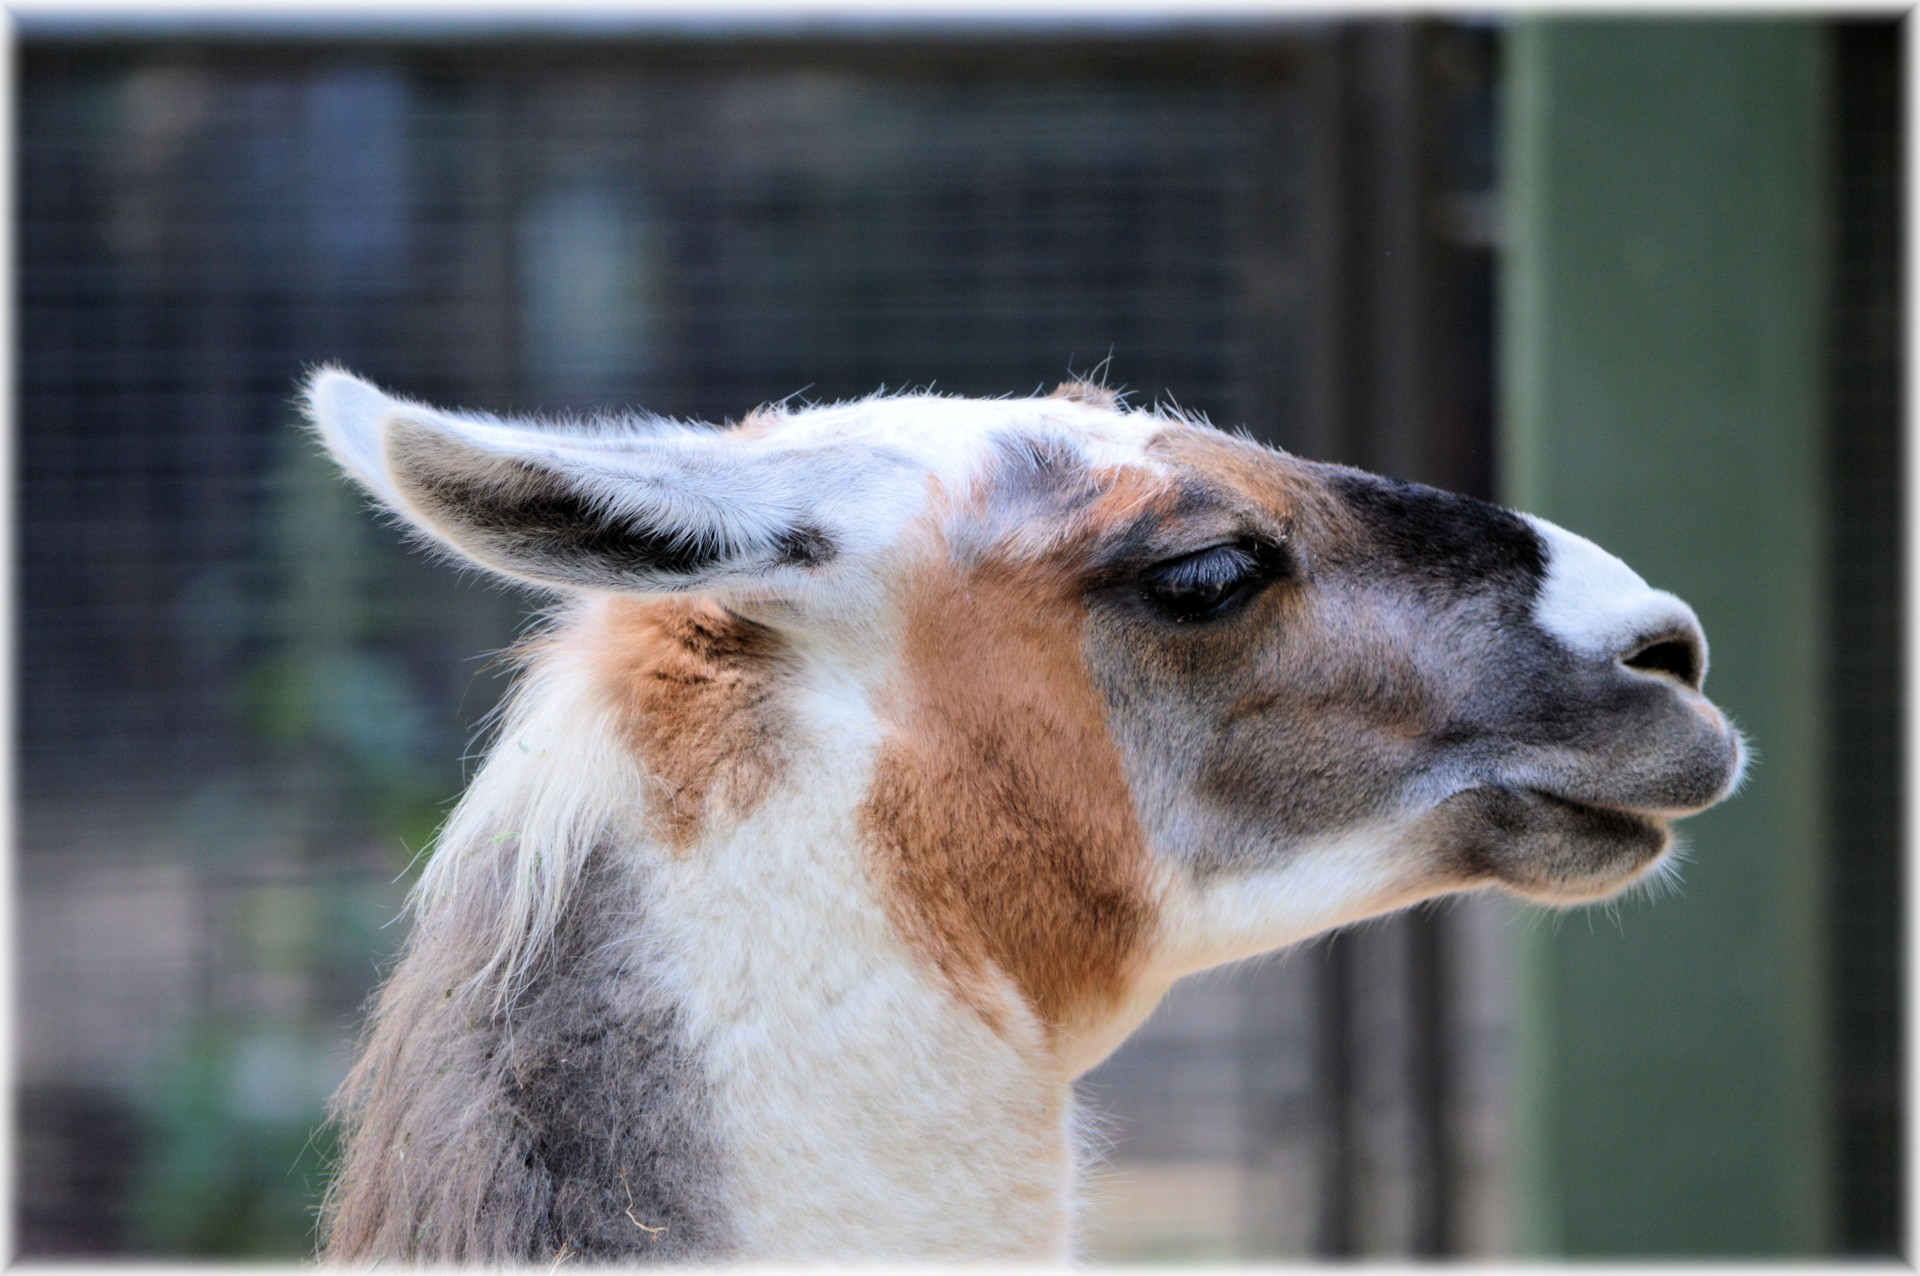 the-llama-07-free-stock-photo-public-domain-pictures